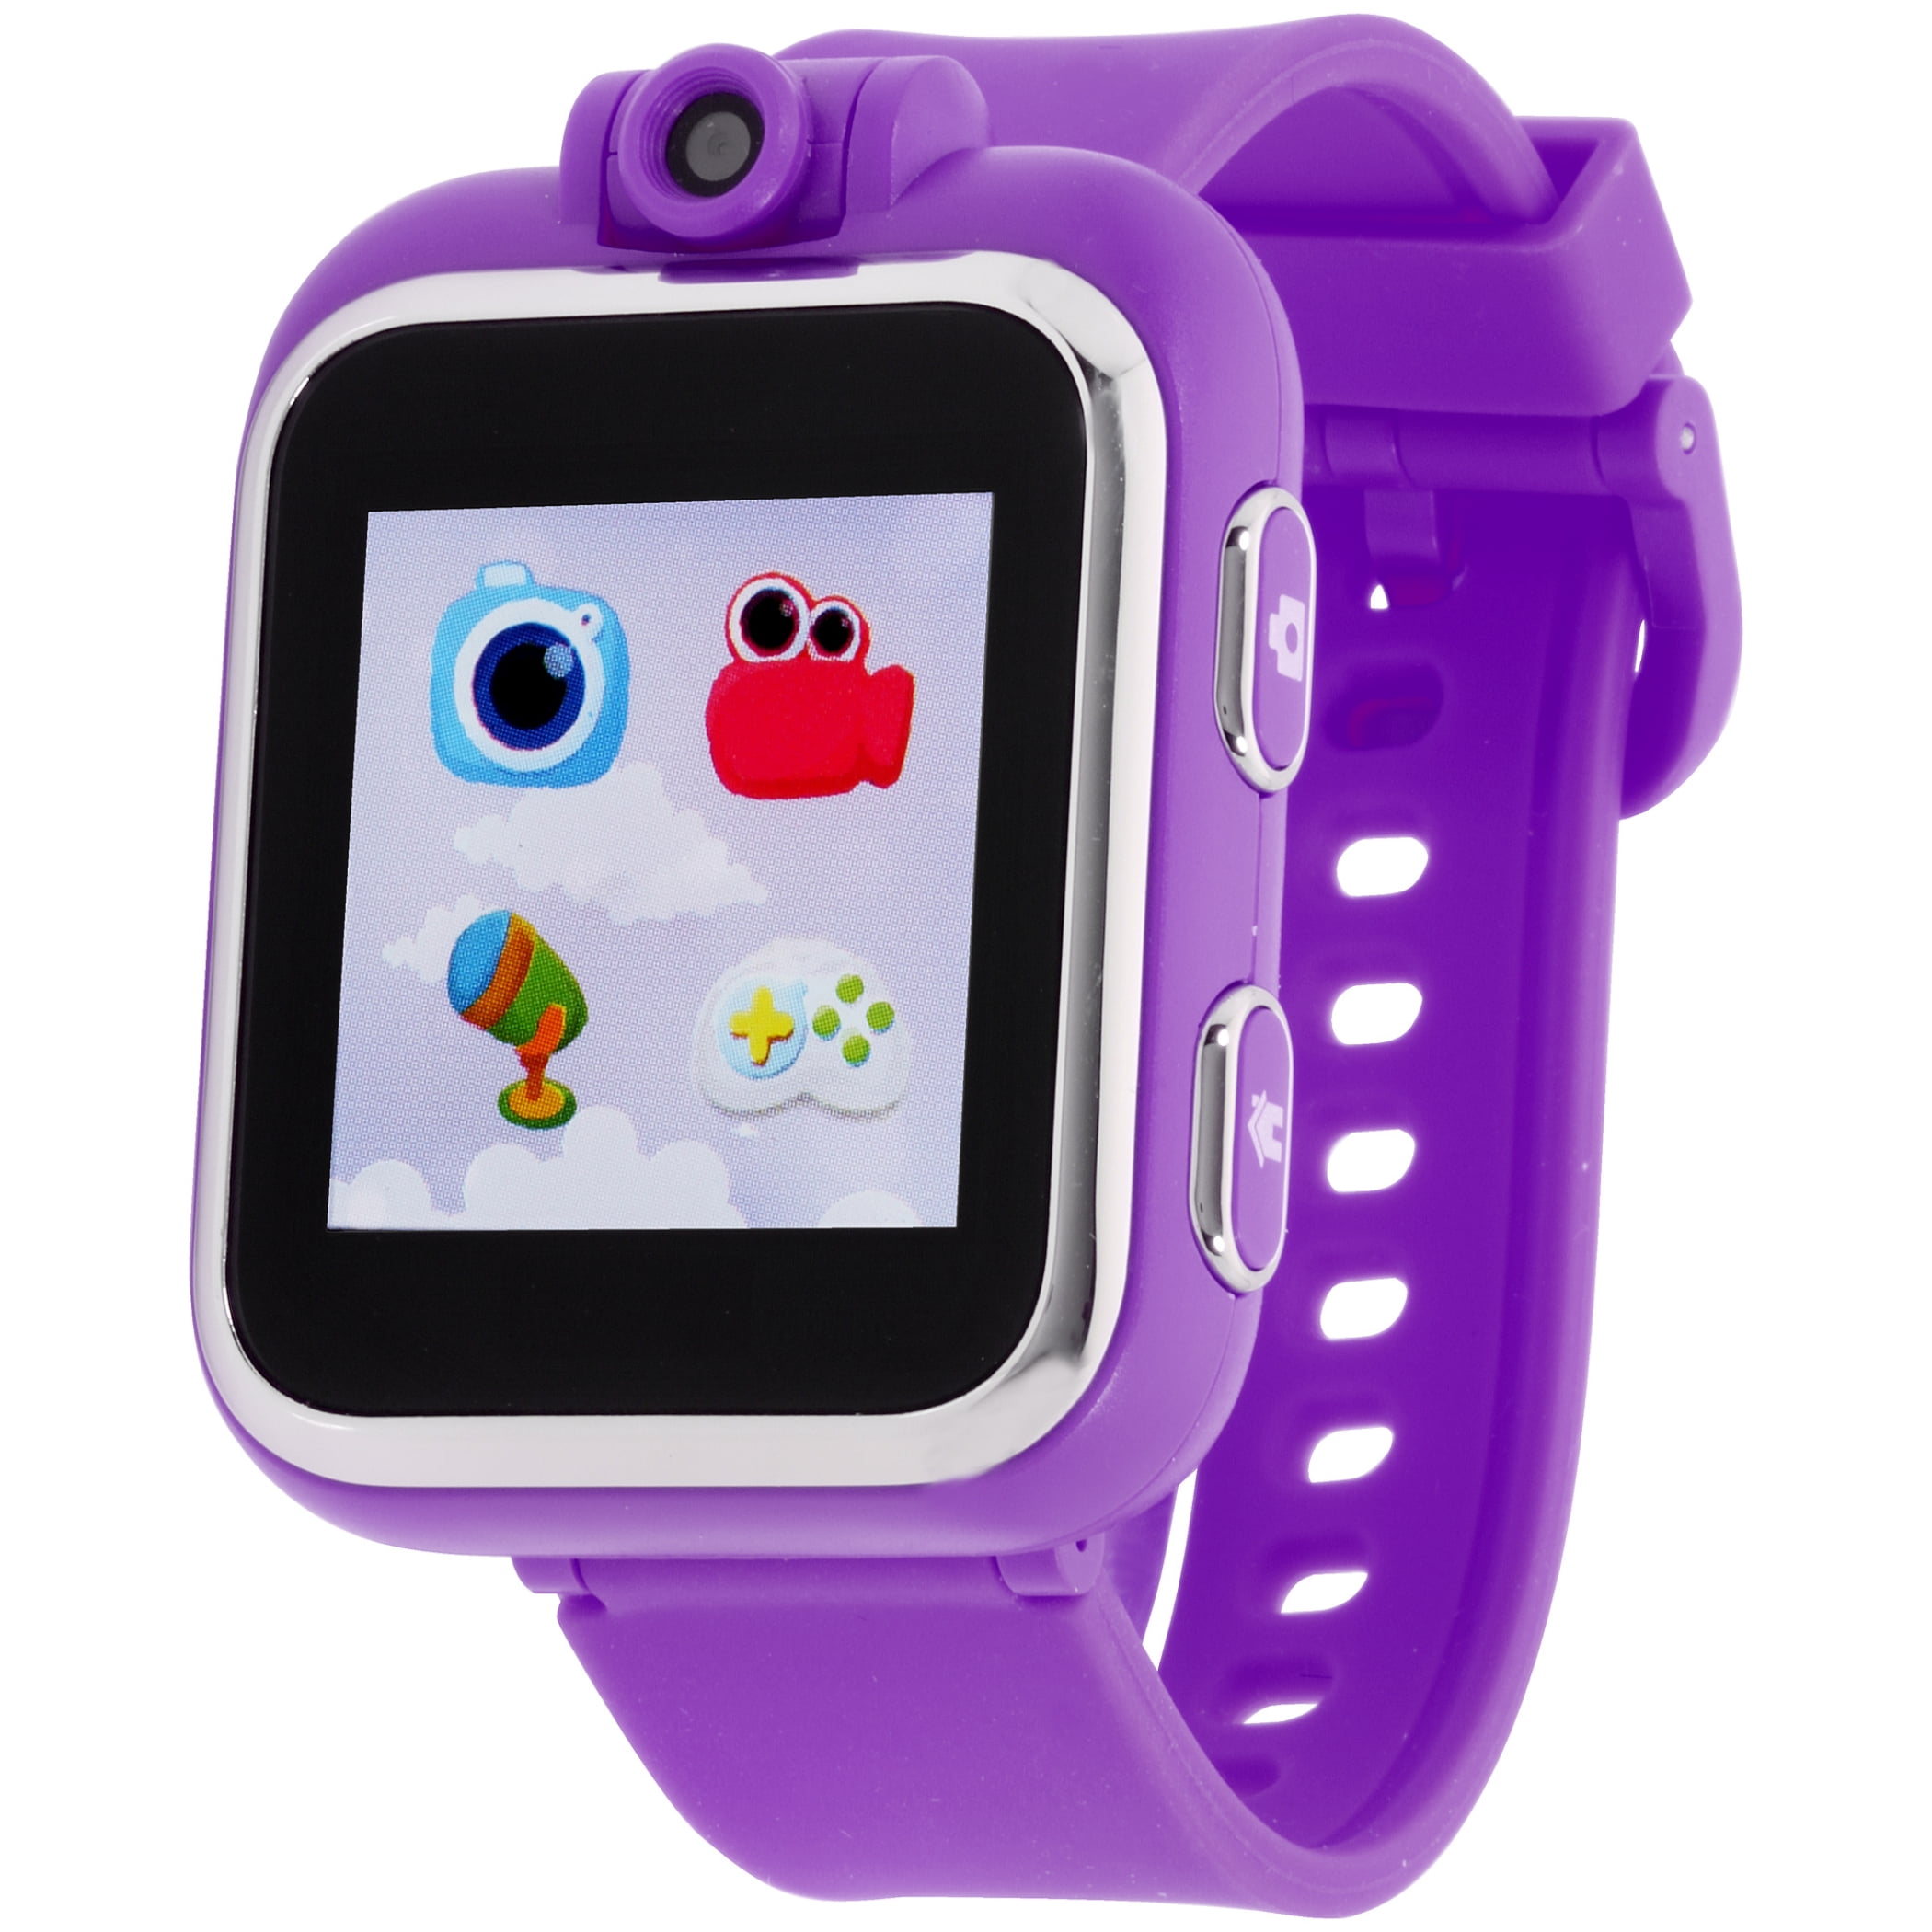 Refurbished Playzoom iTouch Kids Smart 